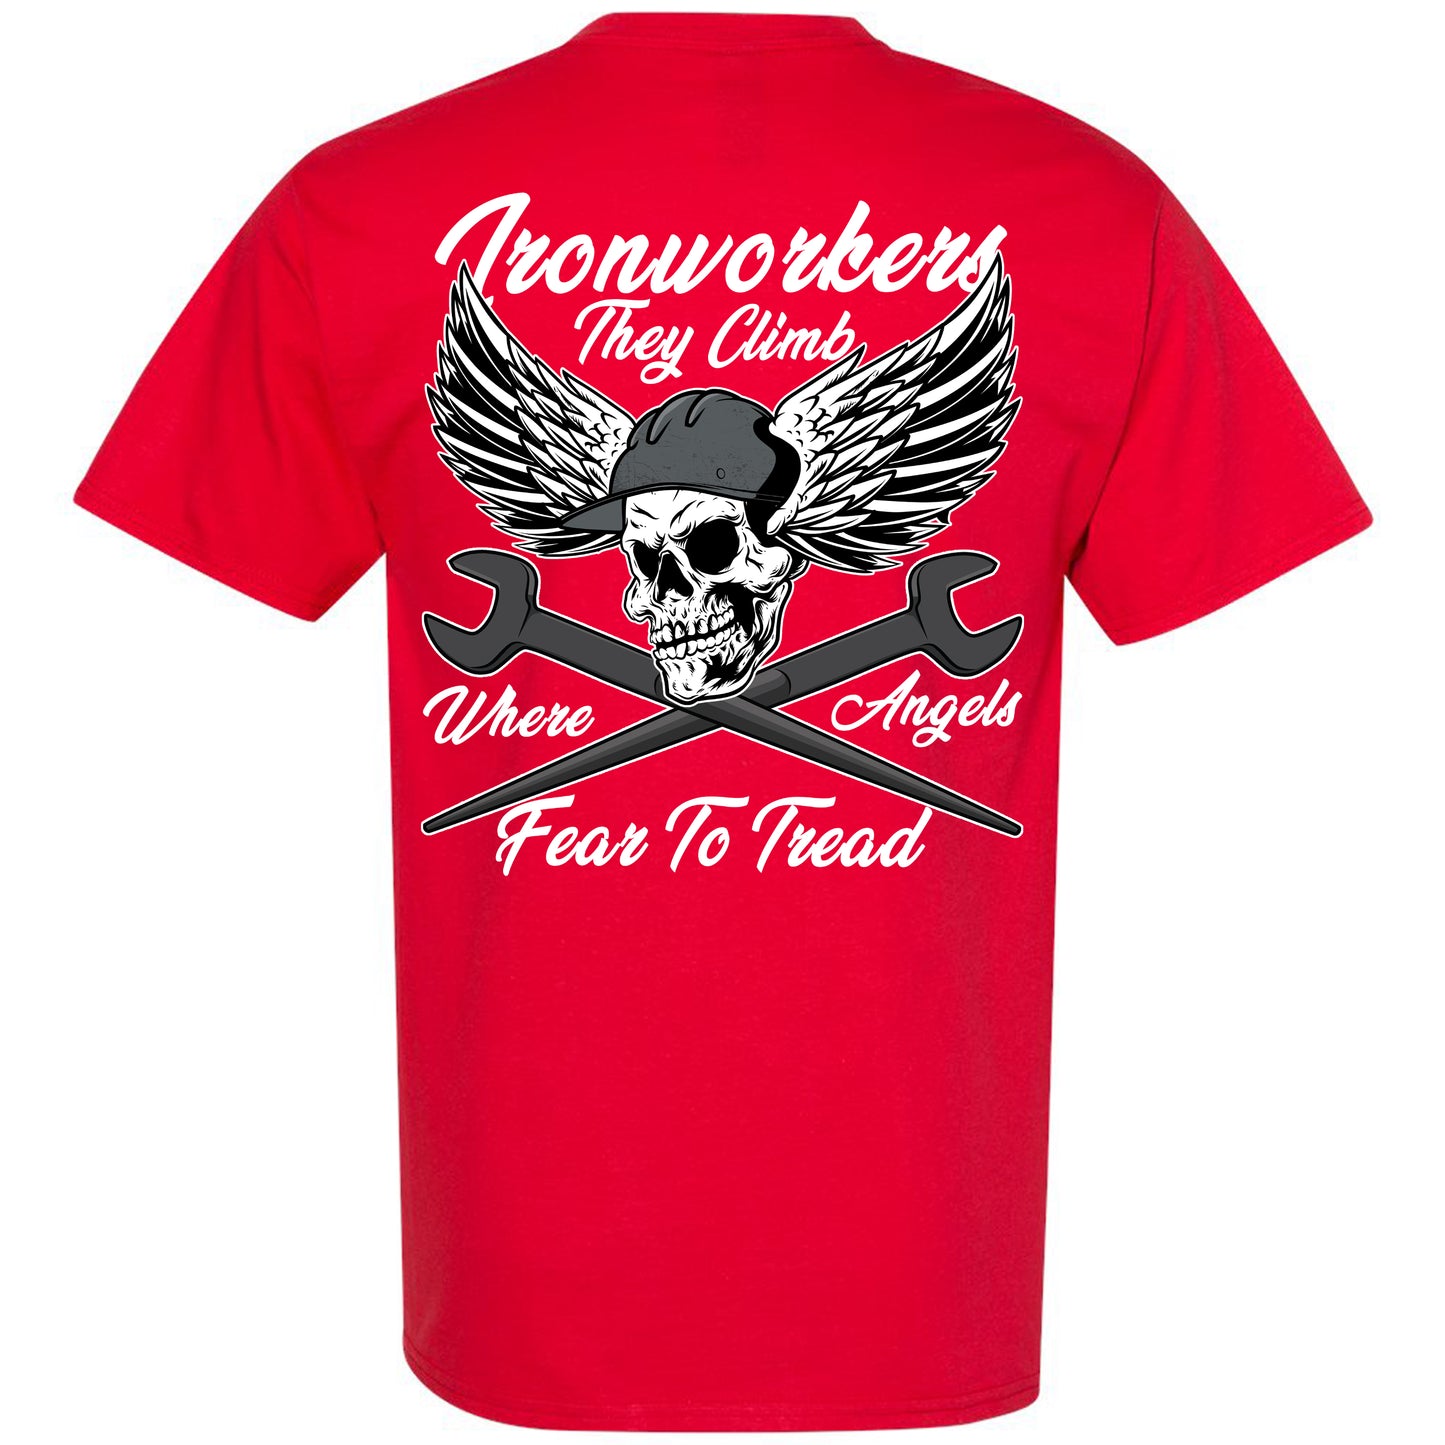 ANGELS FEAR TO TREAD T-SHIRT